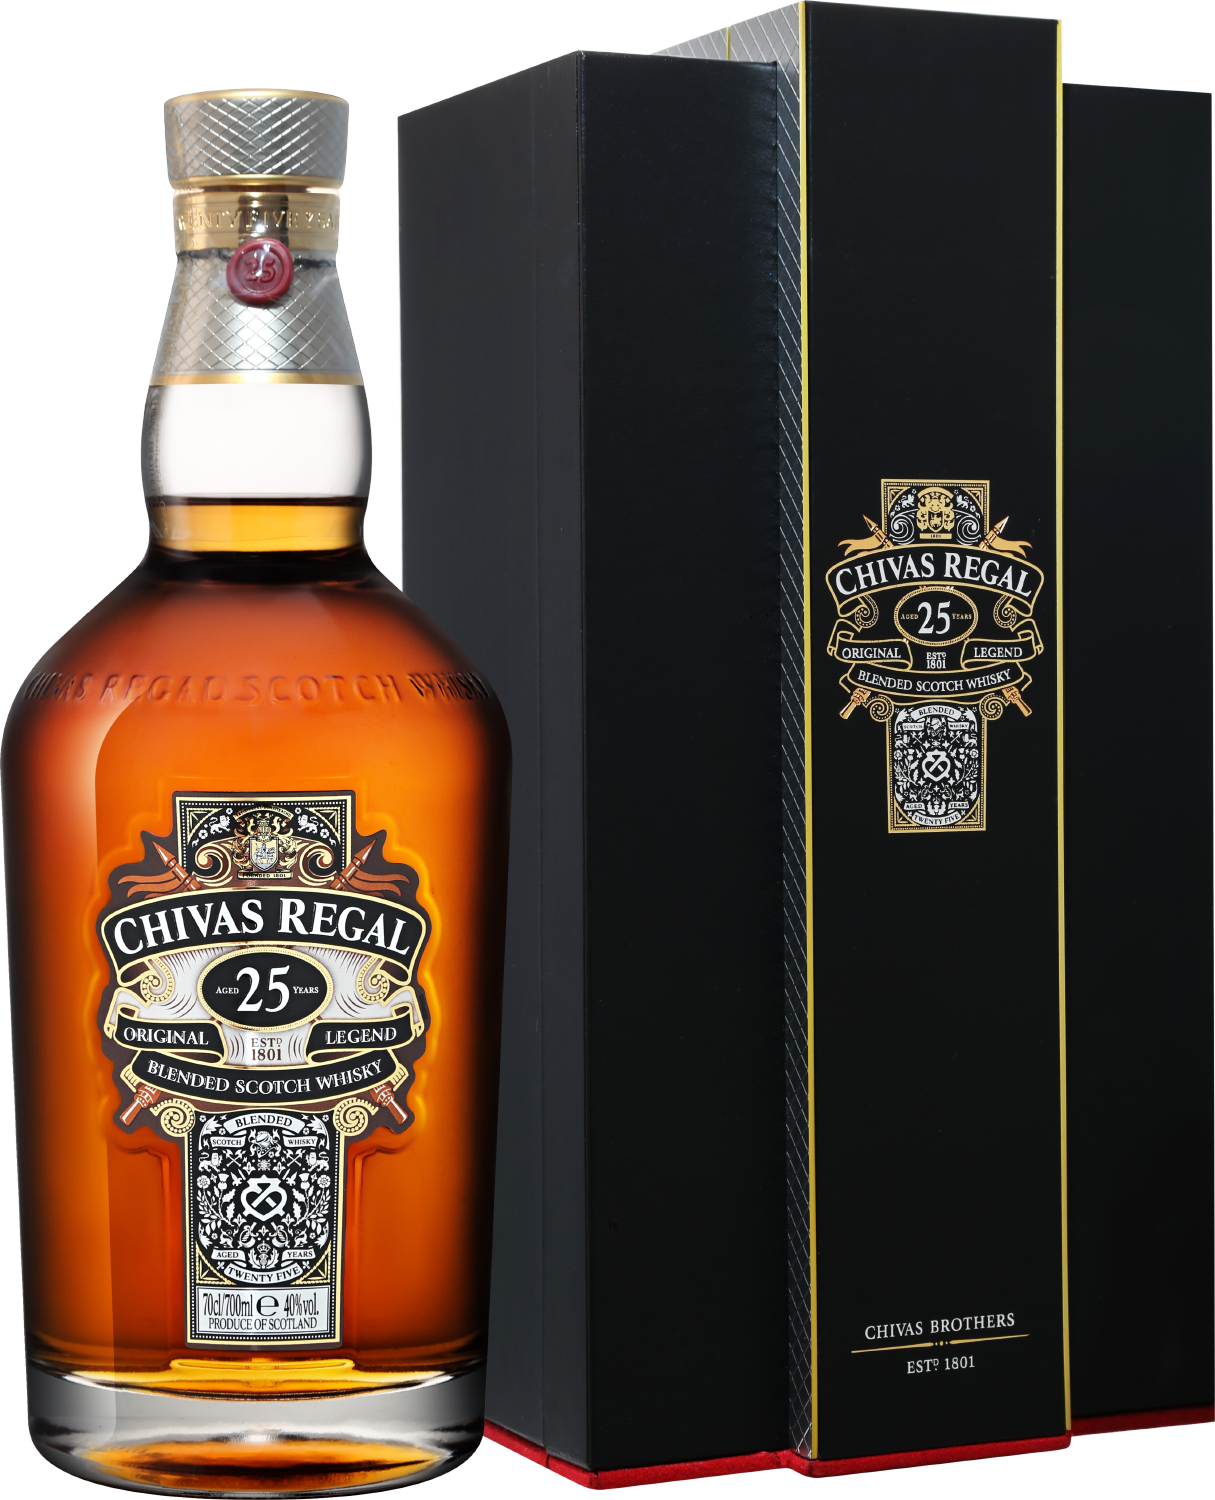 Chivas Regal Blended Scotch Whisky 25 y.o. (gift box) chivas regal blended scotch whisky 25 y o gift box